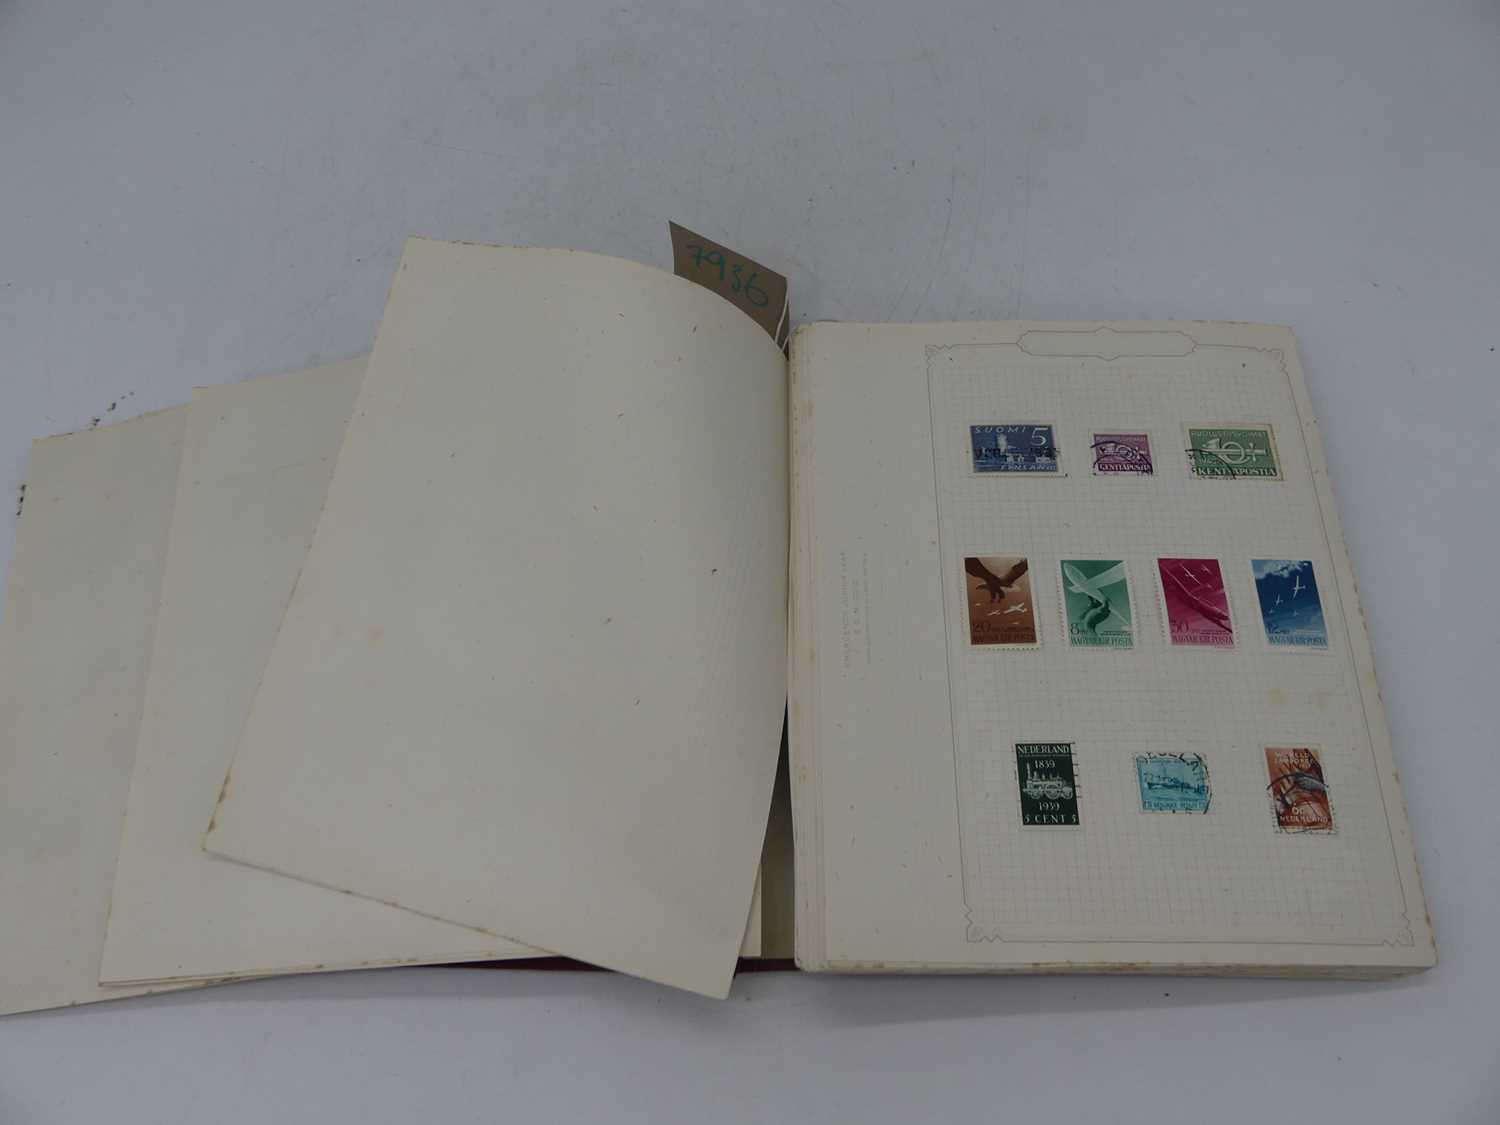 A Simplex Junior stamp album and contents ranging from Argentina to Poland, used 20th century